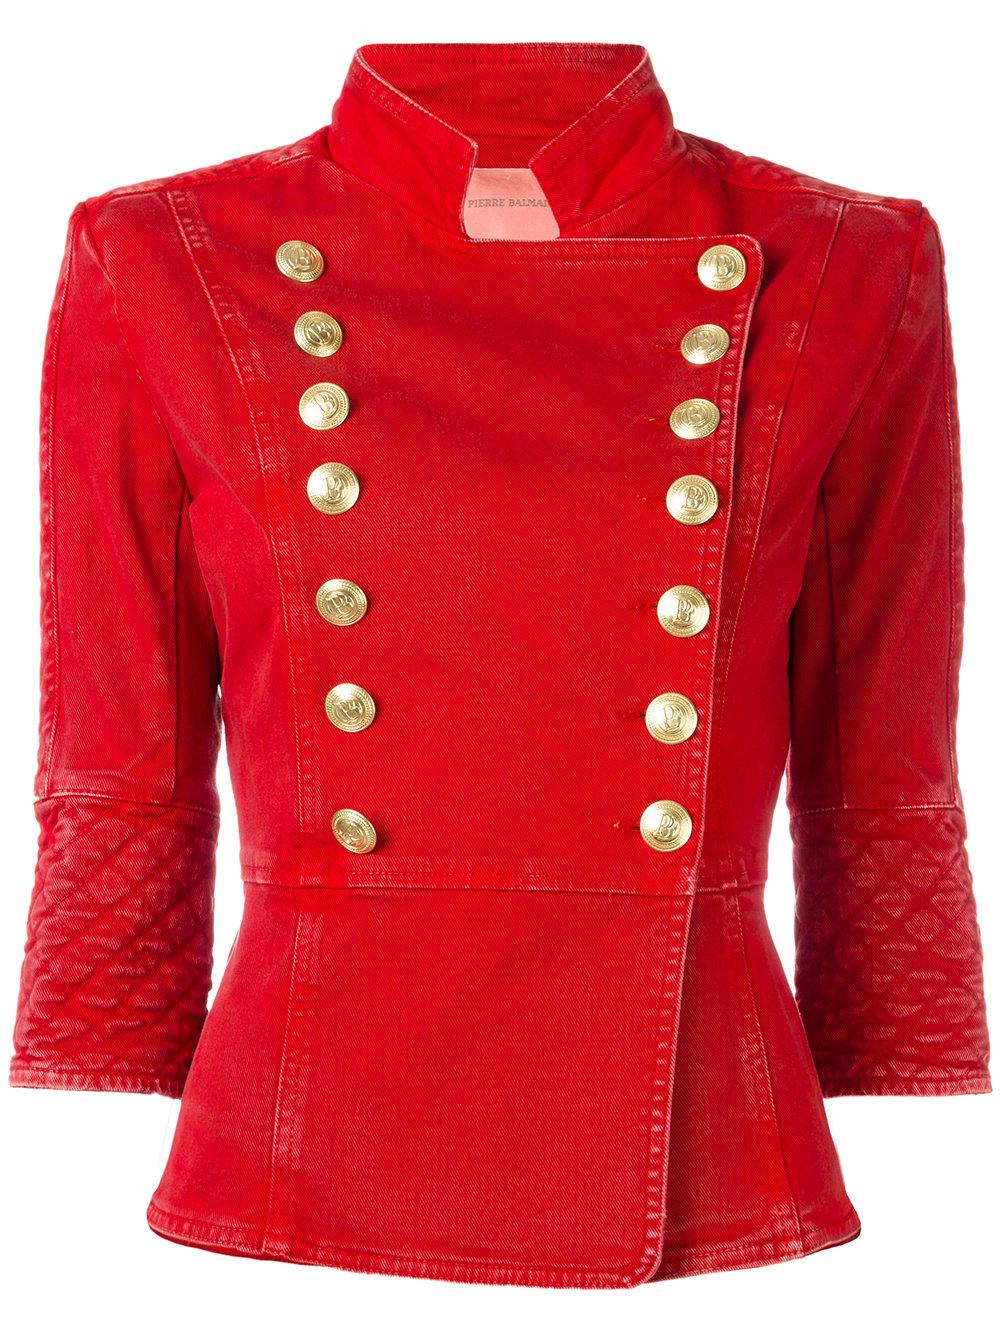 Lyst - Balmain Military Jacket in Red